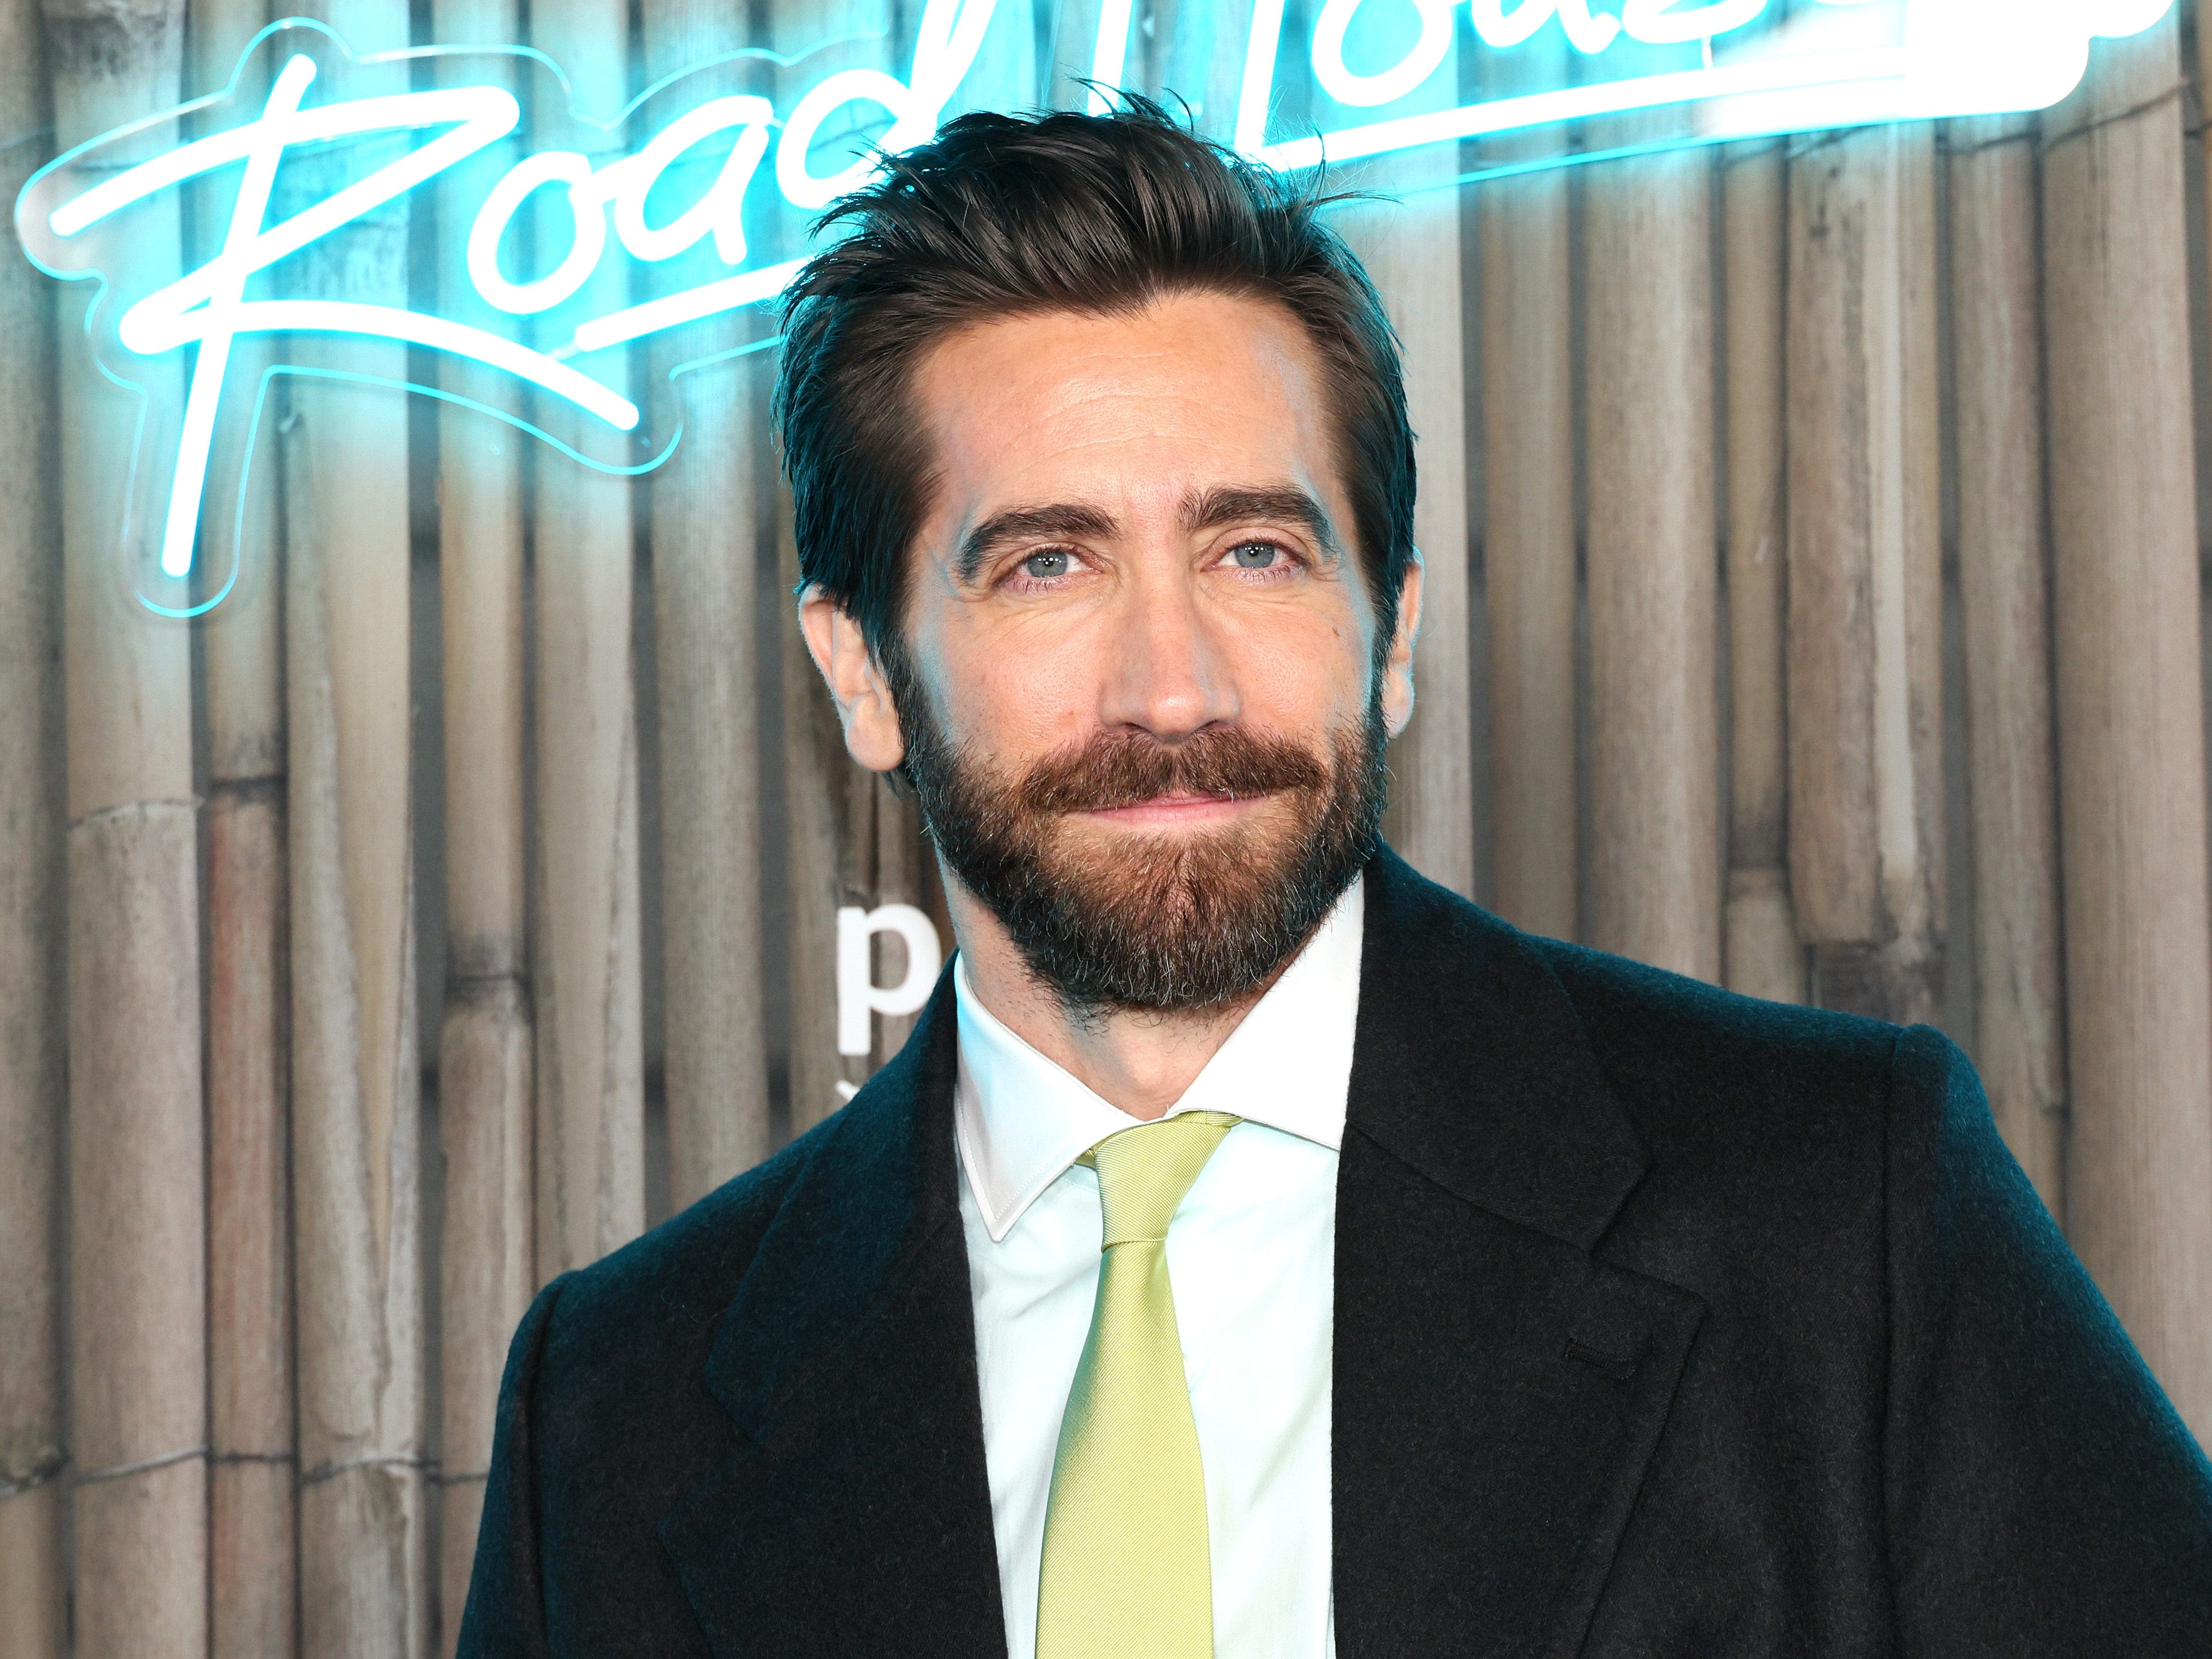 Jake Gyllenhaal says being legally blind is 'advantageous' to his acting career